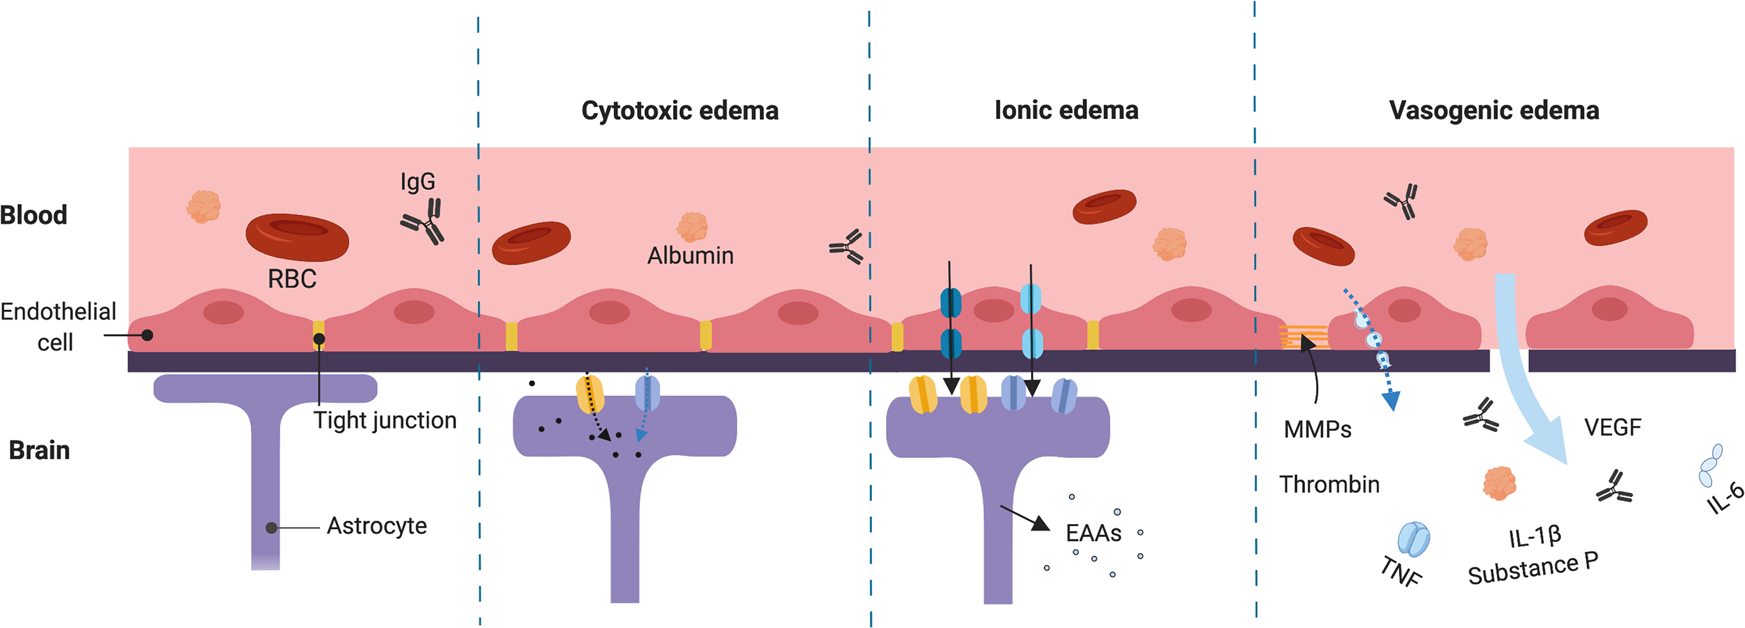 development in targeting ion channels for edema | Acta Pharmacologica Sinica